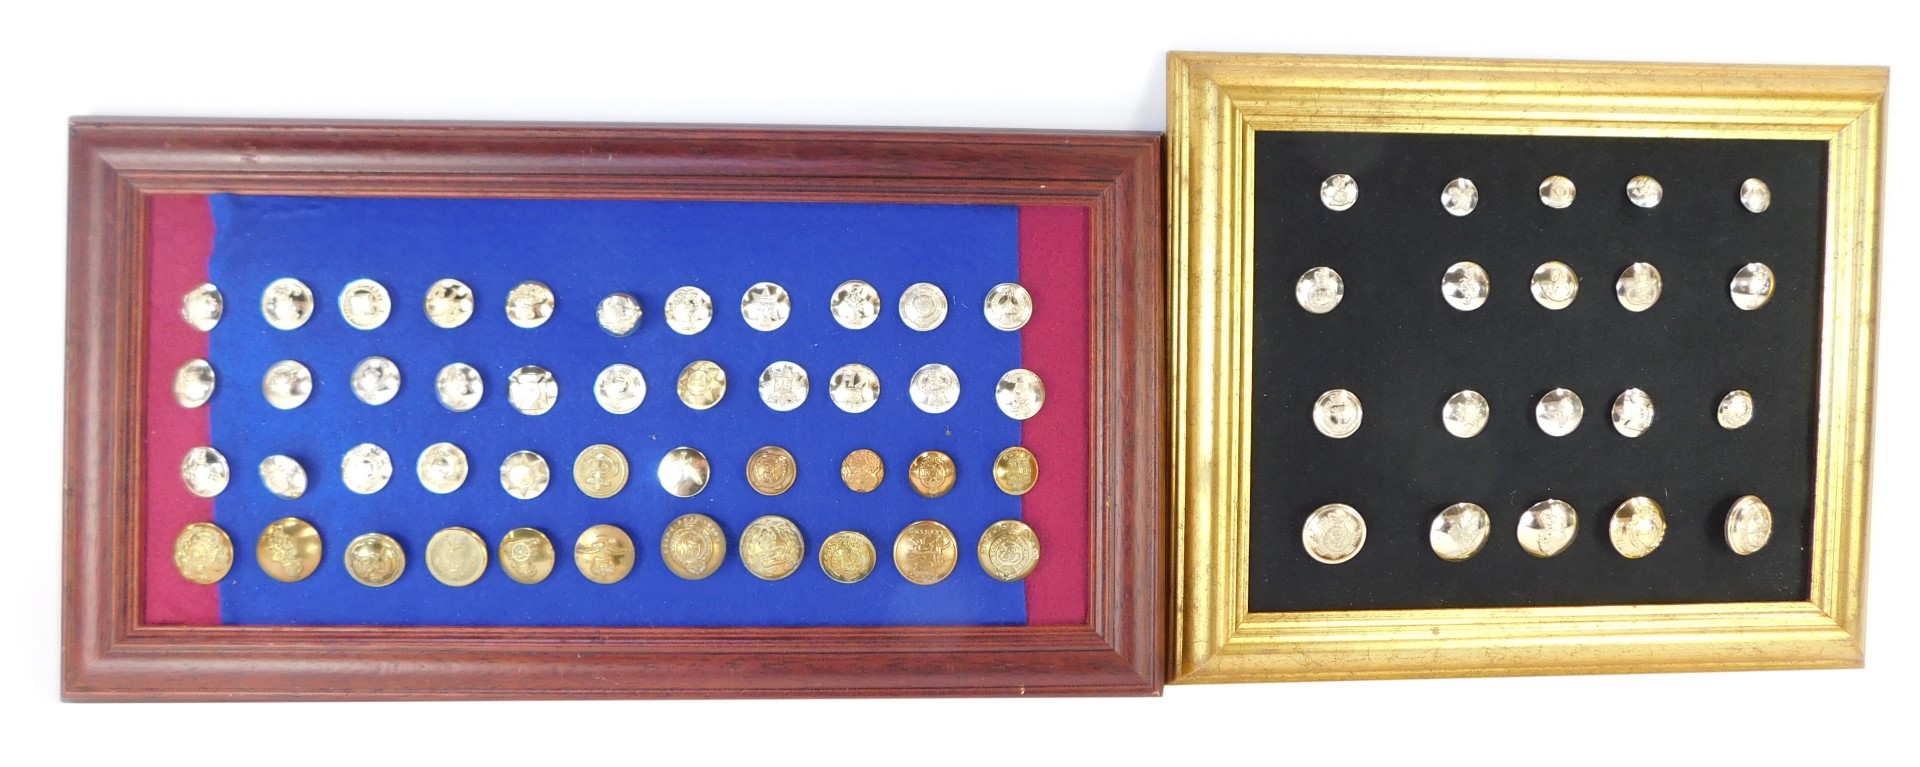 Two framed display cases of military buttons.